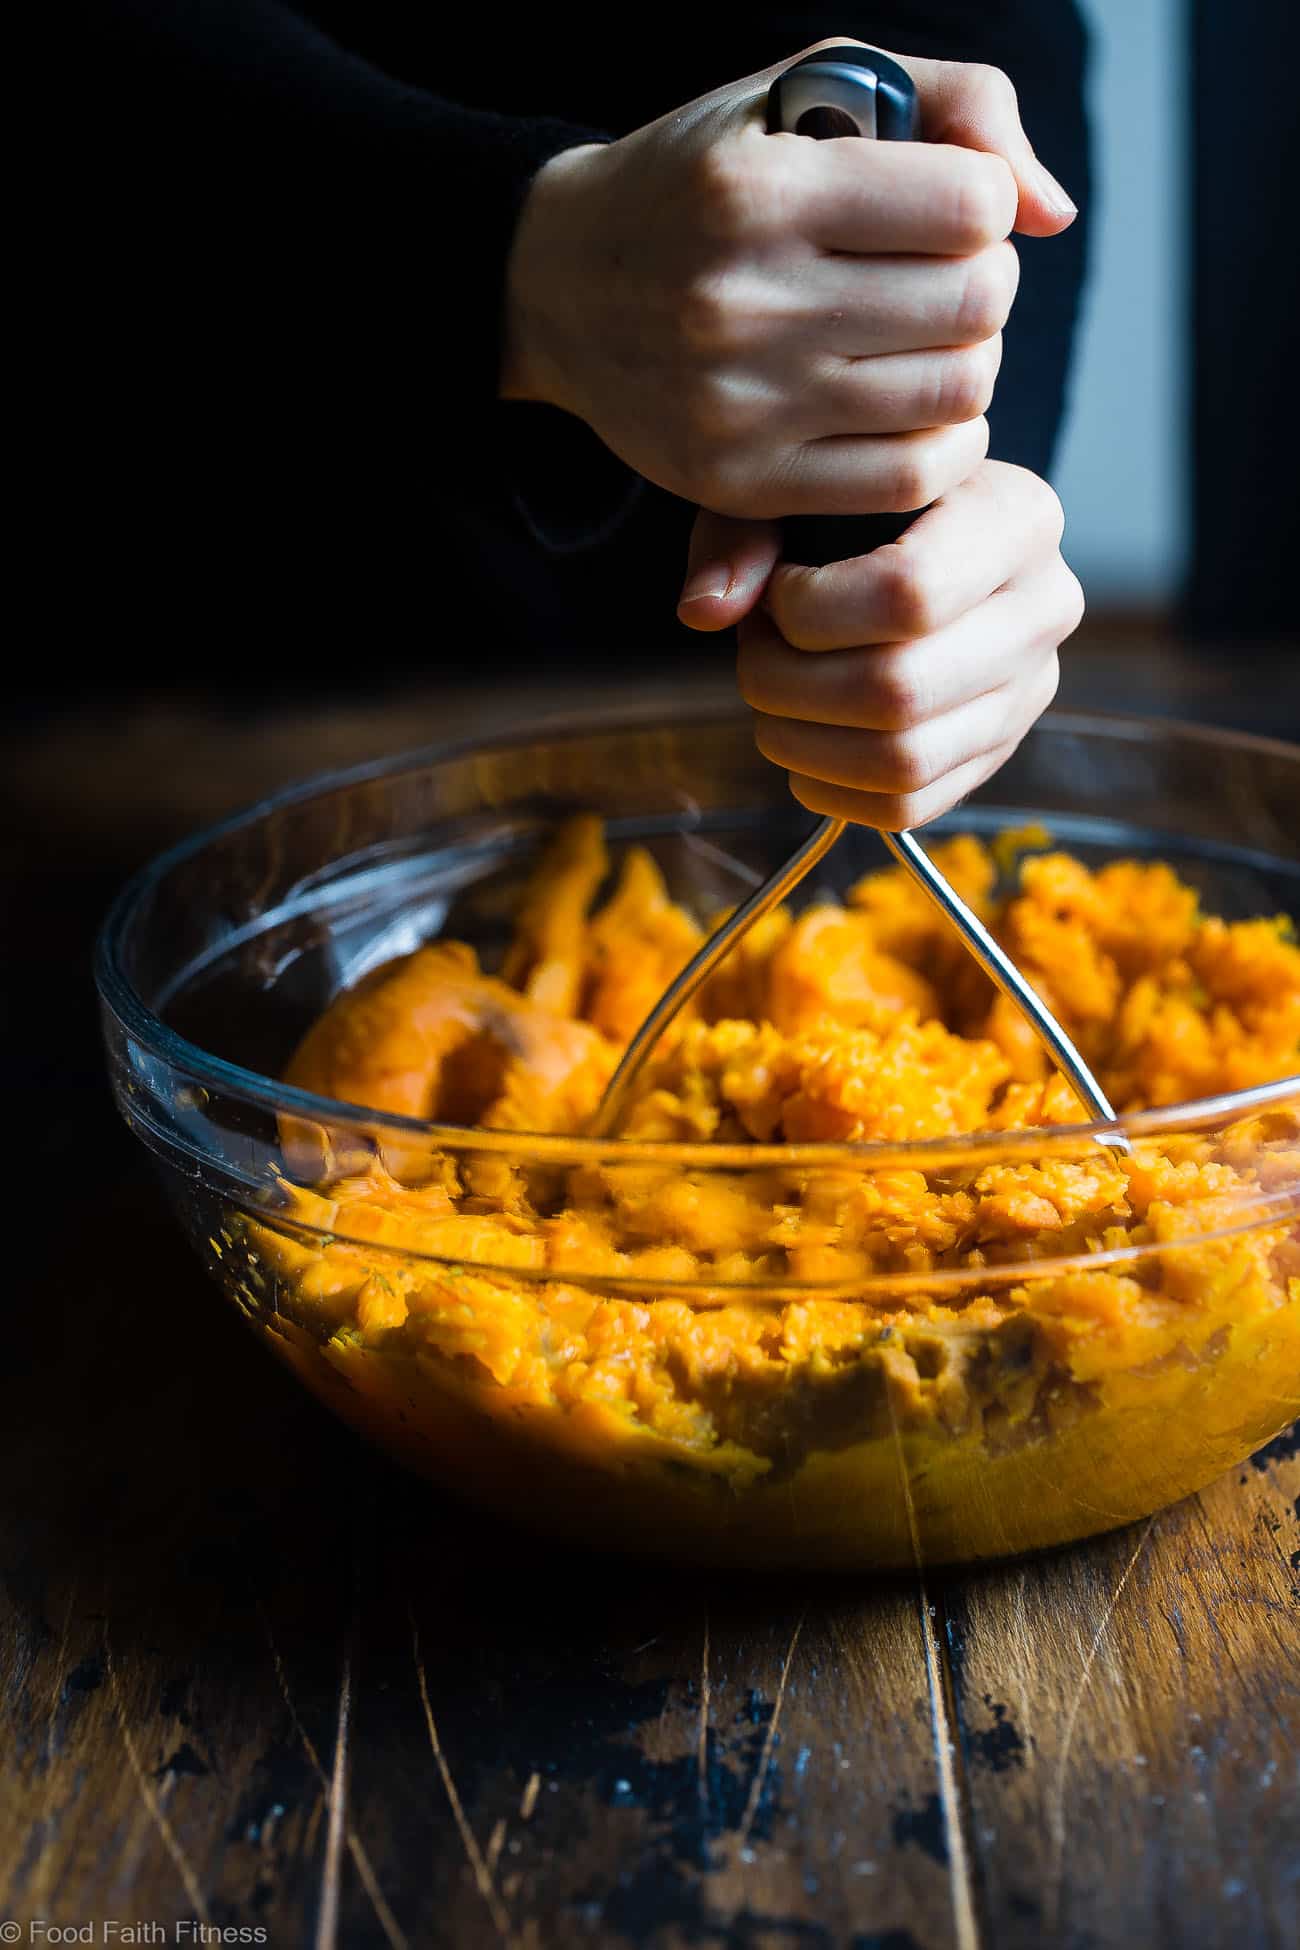 Curried Savory Vegan Healthy Mashed Sweet Potatoes - This healthy sweet potato mash is a sweet and spicy spin on a holiday classic!  So creamy you will never believe they are dairy, grain and gluten free and paleo/vegan/whole30 compliant! | Foodfaithfitness.com | @FoodFaithFit